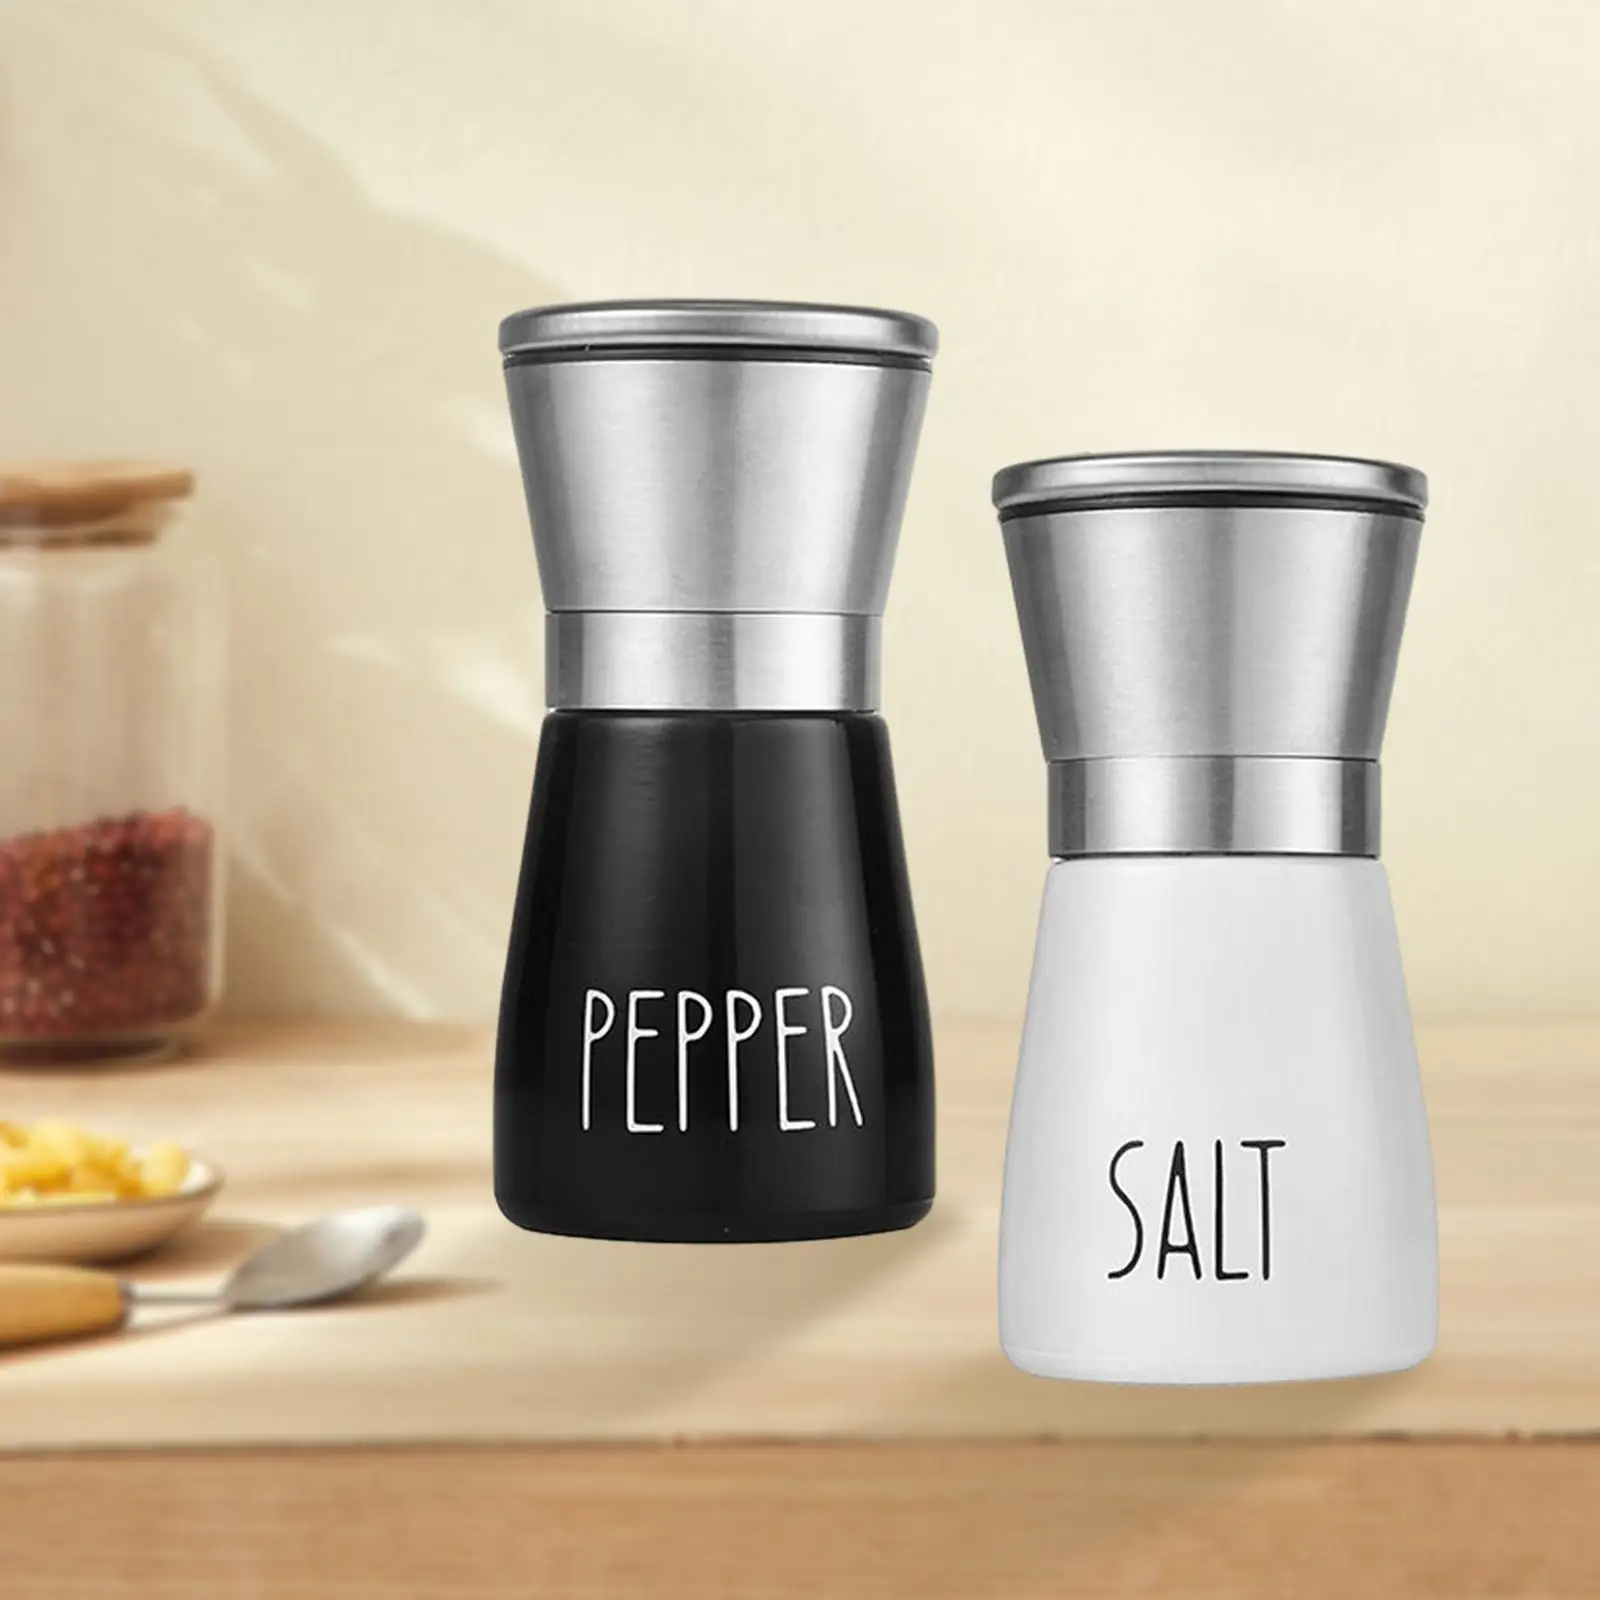 https://ae01.alicdn.com/kf/S379498e4f1424c248e4485614505851bi/2-Pieces-Refillable-Salt-Pepper-Grinder-Set-for-Home-Barbecue-Party-and-Every-Meal-Ceramic-Blades.jpg